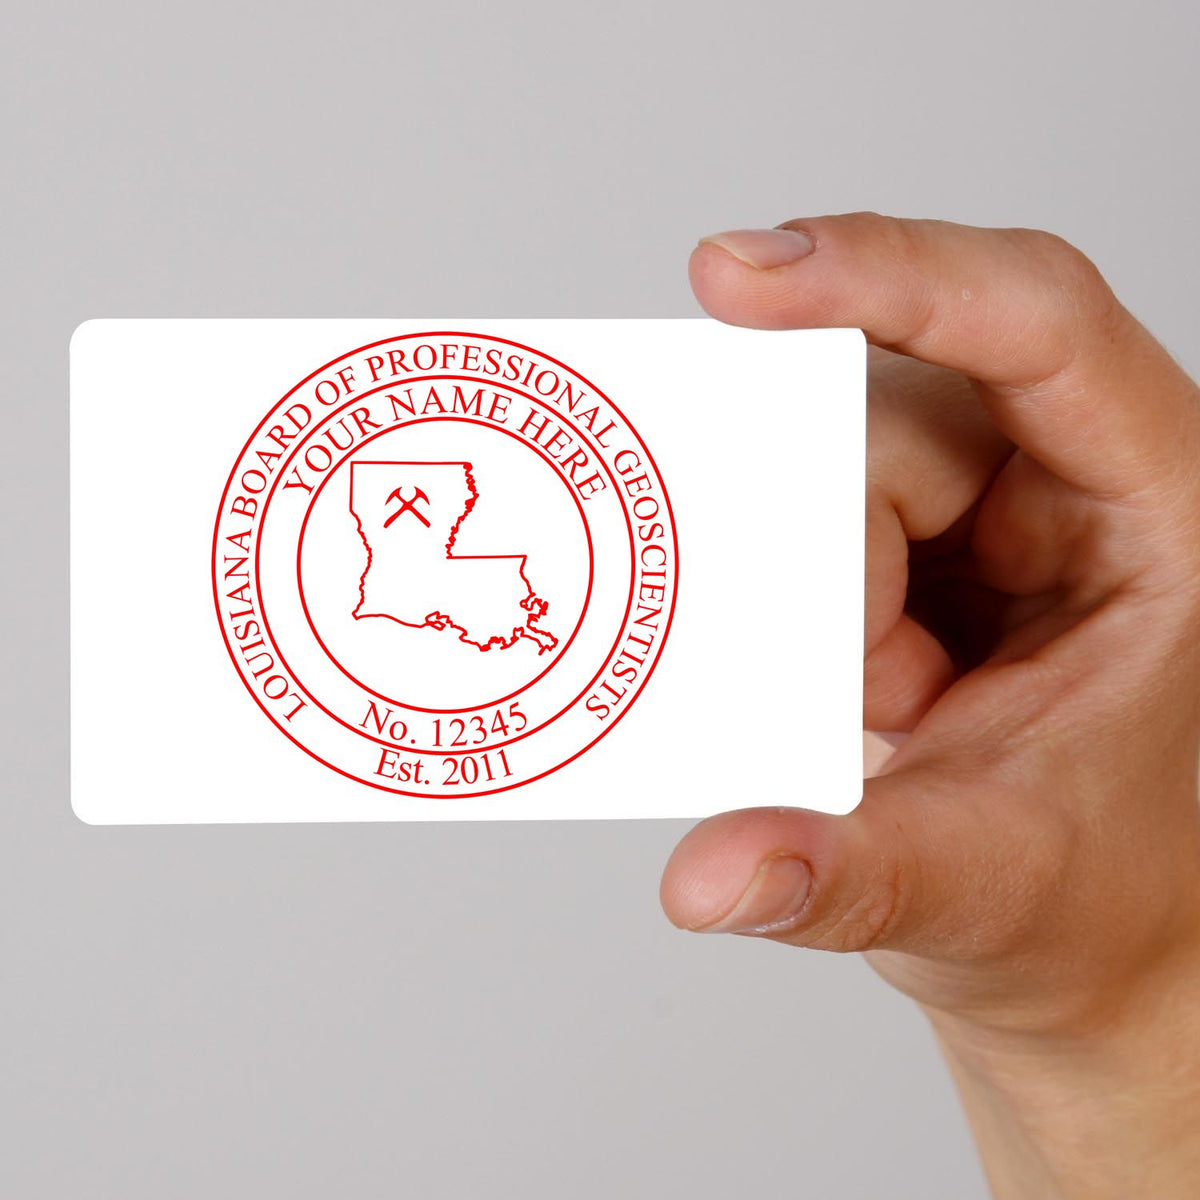 A lifestyle photo showing a stamped image of the Louisiana Professional Geologist Seal Stamp on a piece of paper